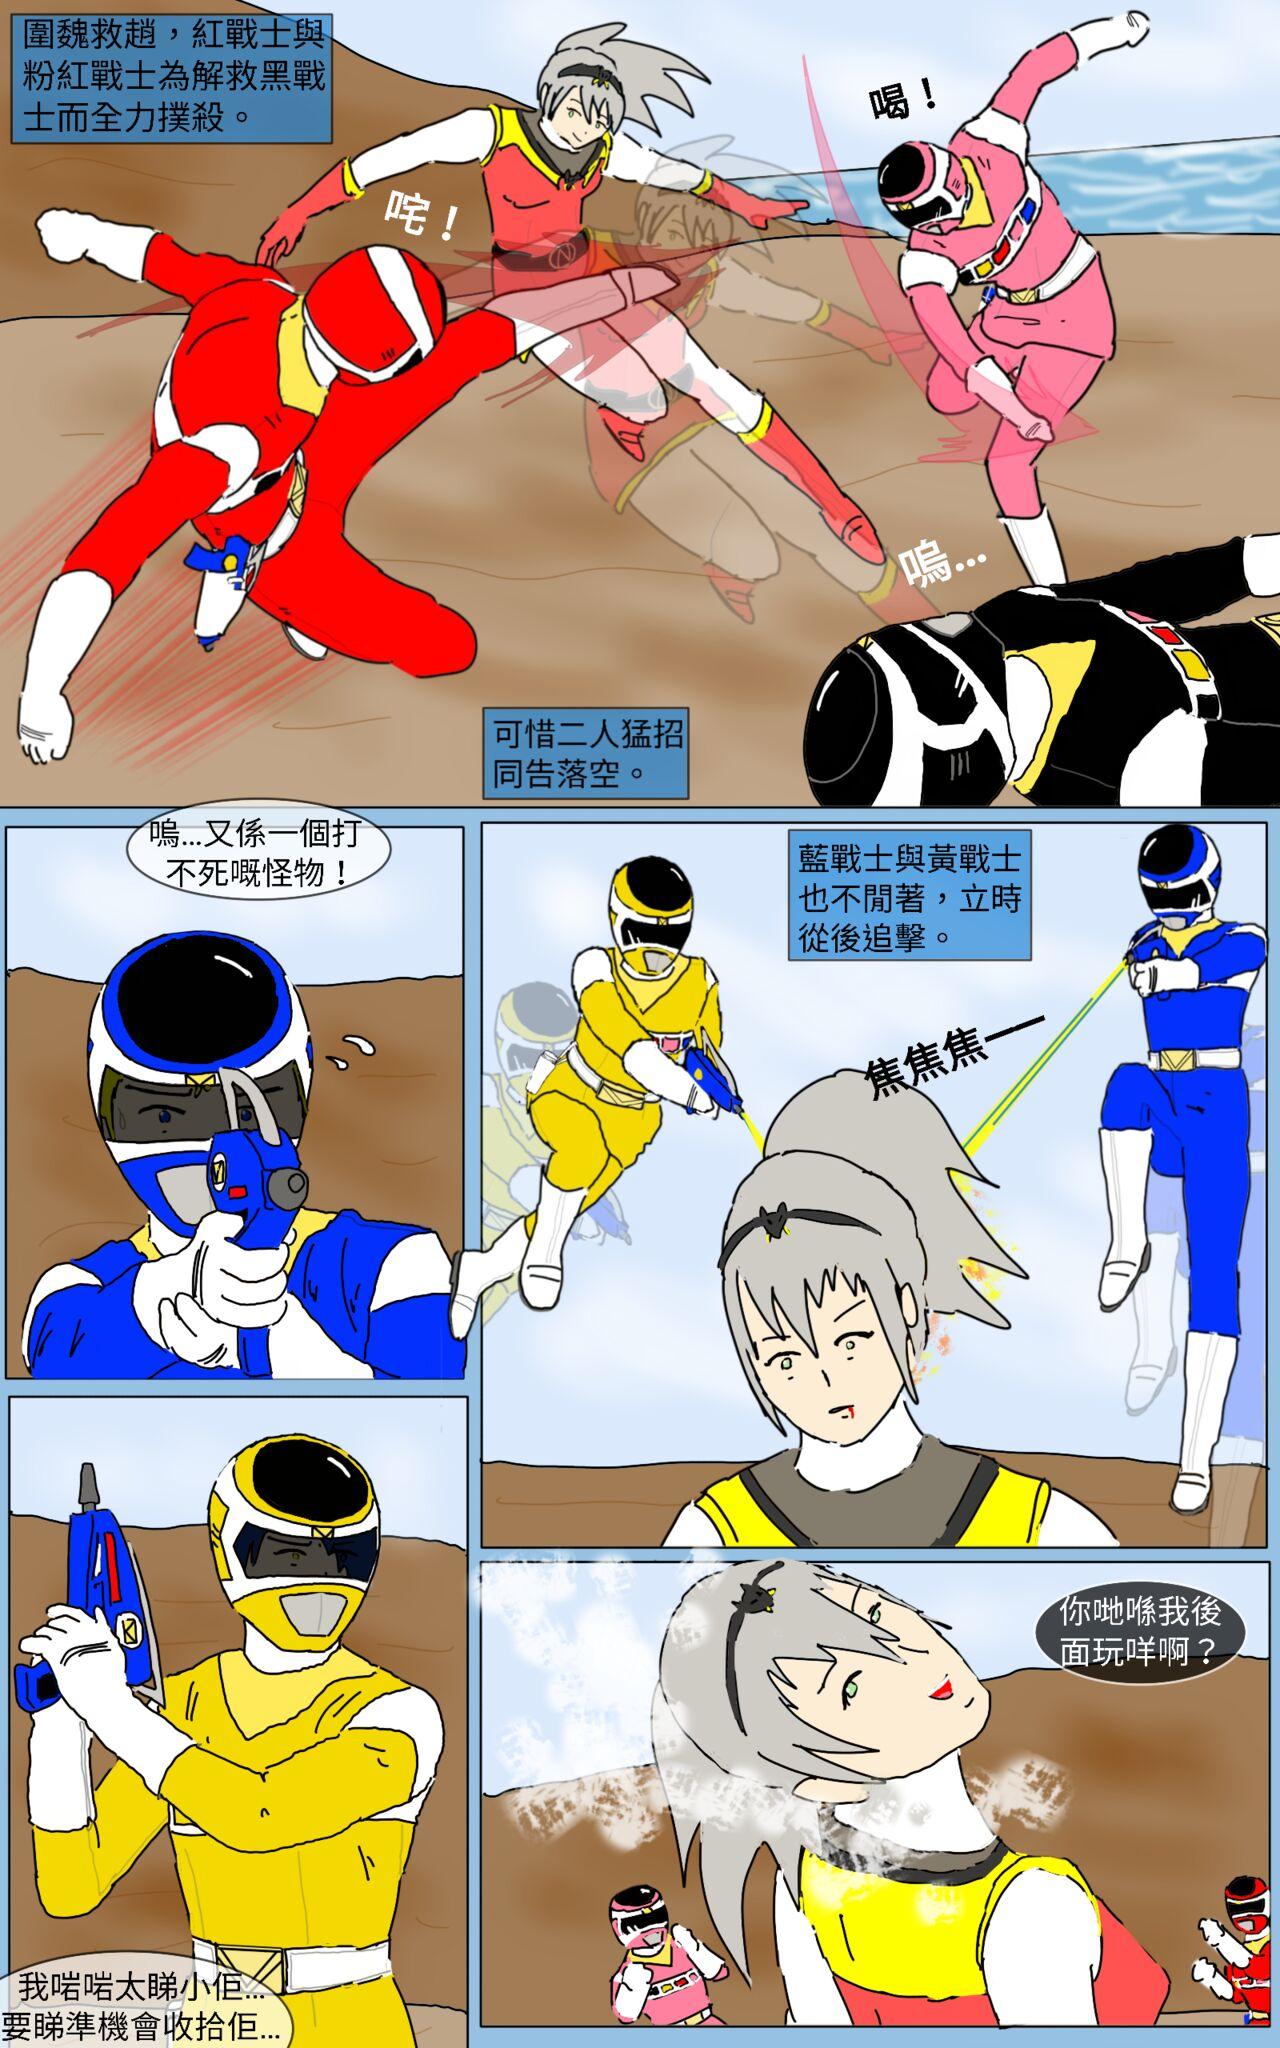 Tied Mission 16 - Super sentai High Heels - Page 12